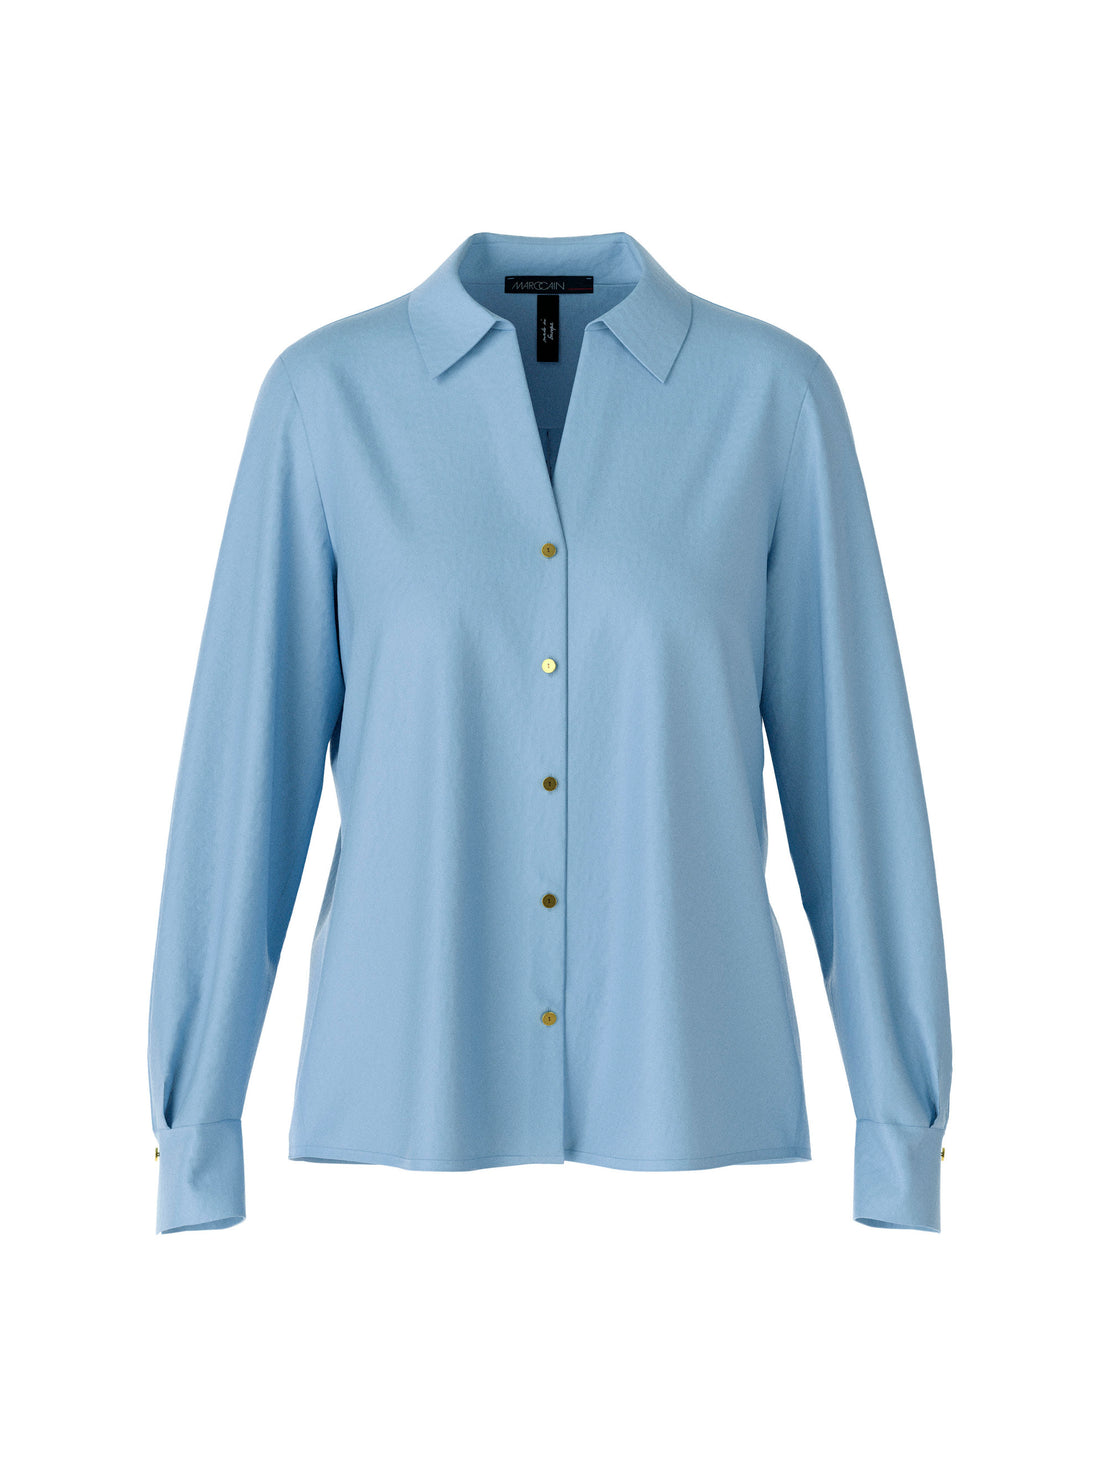 Classic Shirt Blouse With V-Neck_VC 51.26 W08_321_02